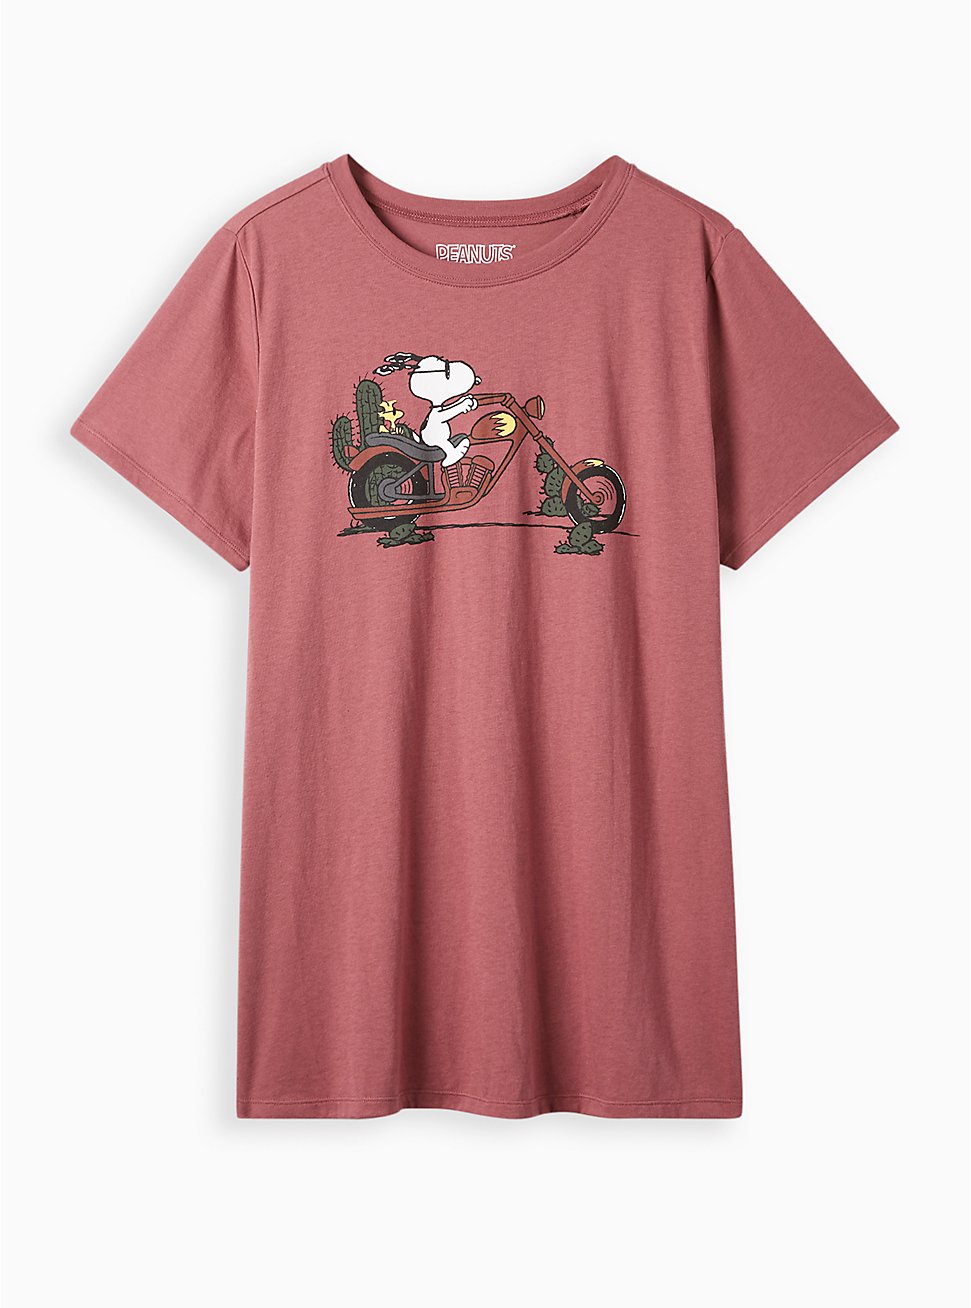 Plus Size Classic Fit Crew Tee - Cotton Dusty Red Snoopy, WILD GINGER: BURGUNDY, hi-res